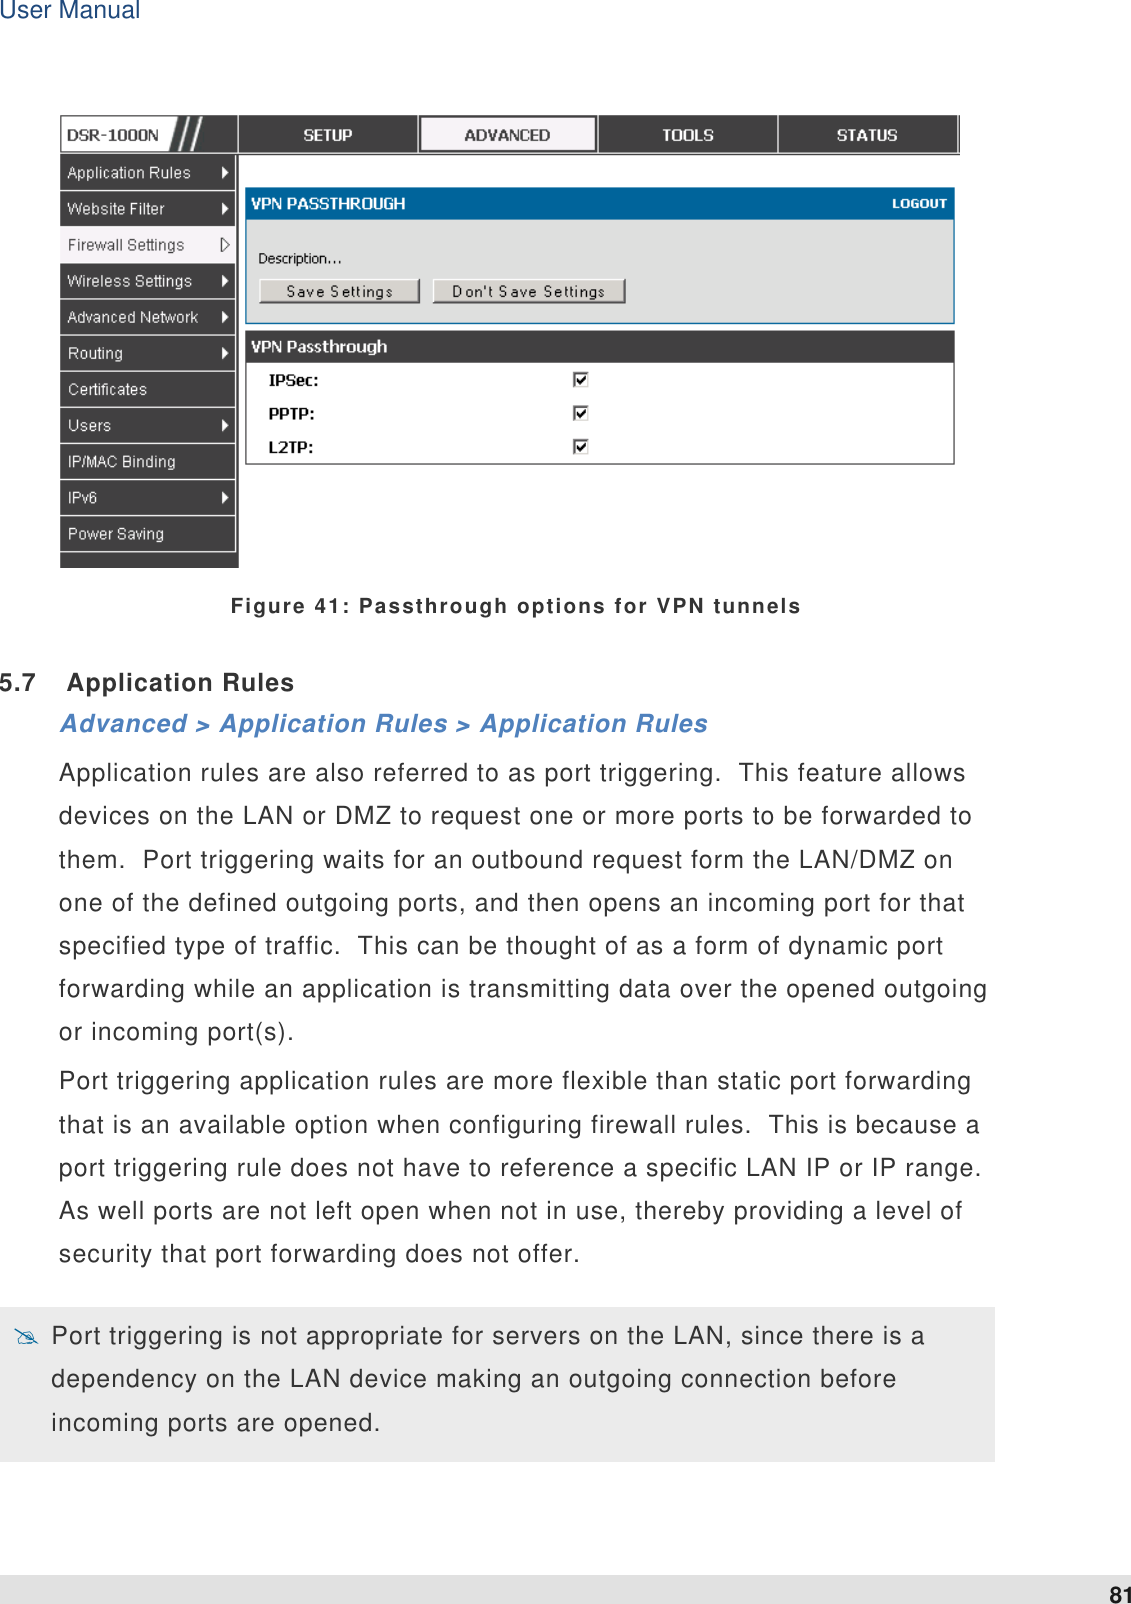 User Manual 81    Figure 41: Passthrough options for VPN tunnels 5.7  Application Rules Advanced &gt; Application Rules &gt; Application Rules Application rules are also referred to as port triggering.  This feature allows devices on the LAN or DMZ to request one or more ports to be forwarded to them.  Port triggering waits for an outbound request form the LAN/DMZ on one of the defined outgoing ports, and then opens an incoming port for that specified type of traffic.  This can be thought of as a form of dynamic port forwarding while an application is transmitting data over the opened outgoing or incoming port(s).   Port triggering application rules are more flexible than static port forwarding that is an available option when configuring firewall rules.  This is because a port triggering rule does not have to reference a specific LAN IP or IP range. As well ports are not left open when not in use, thereby providing a level of security that port forwarding does not offer.     Port triggering is not appropriate for servers on the LAN, since there is a dependency on the LAN device making an outgoing connection before incoming ports are opened.  